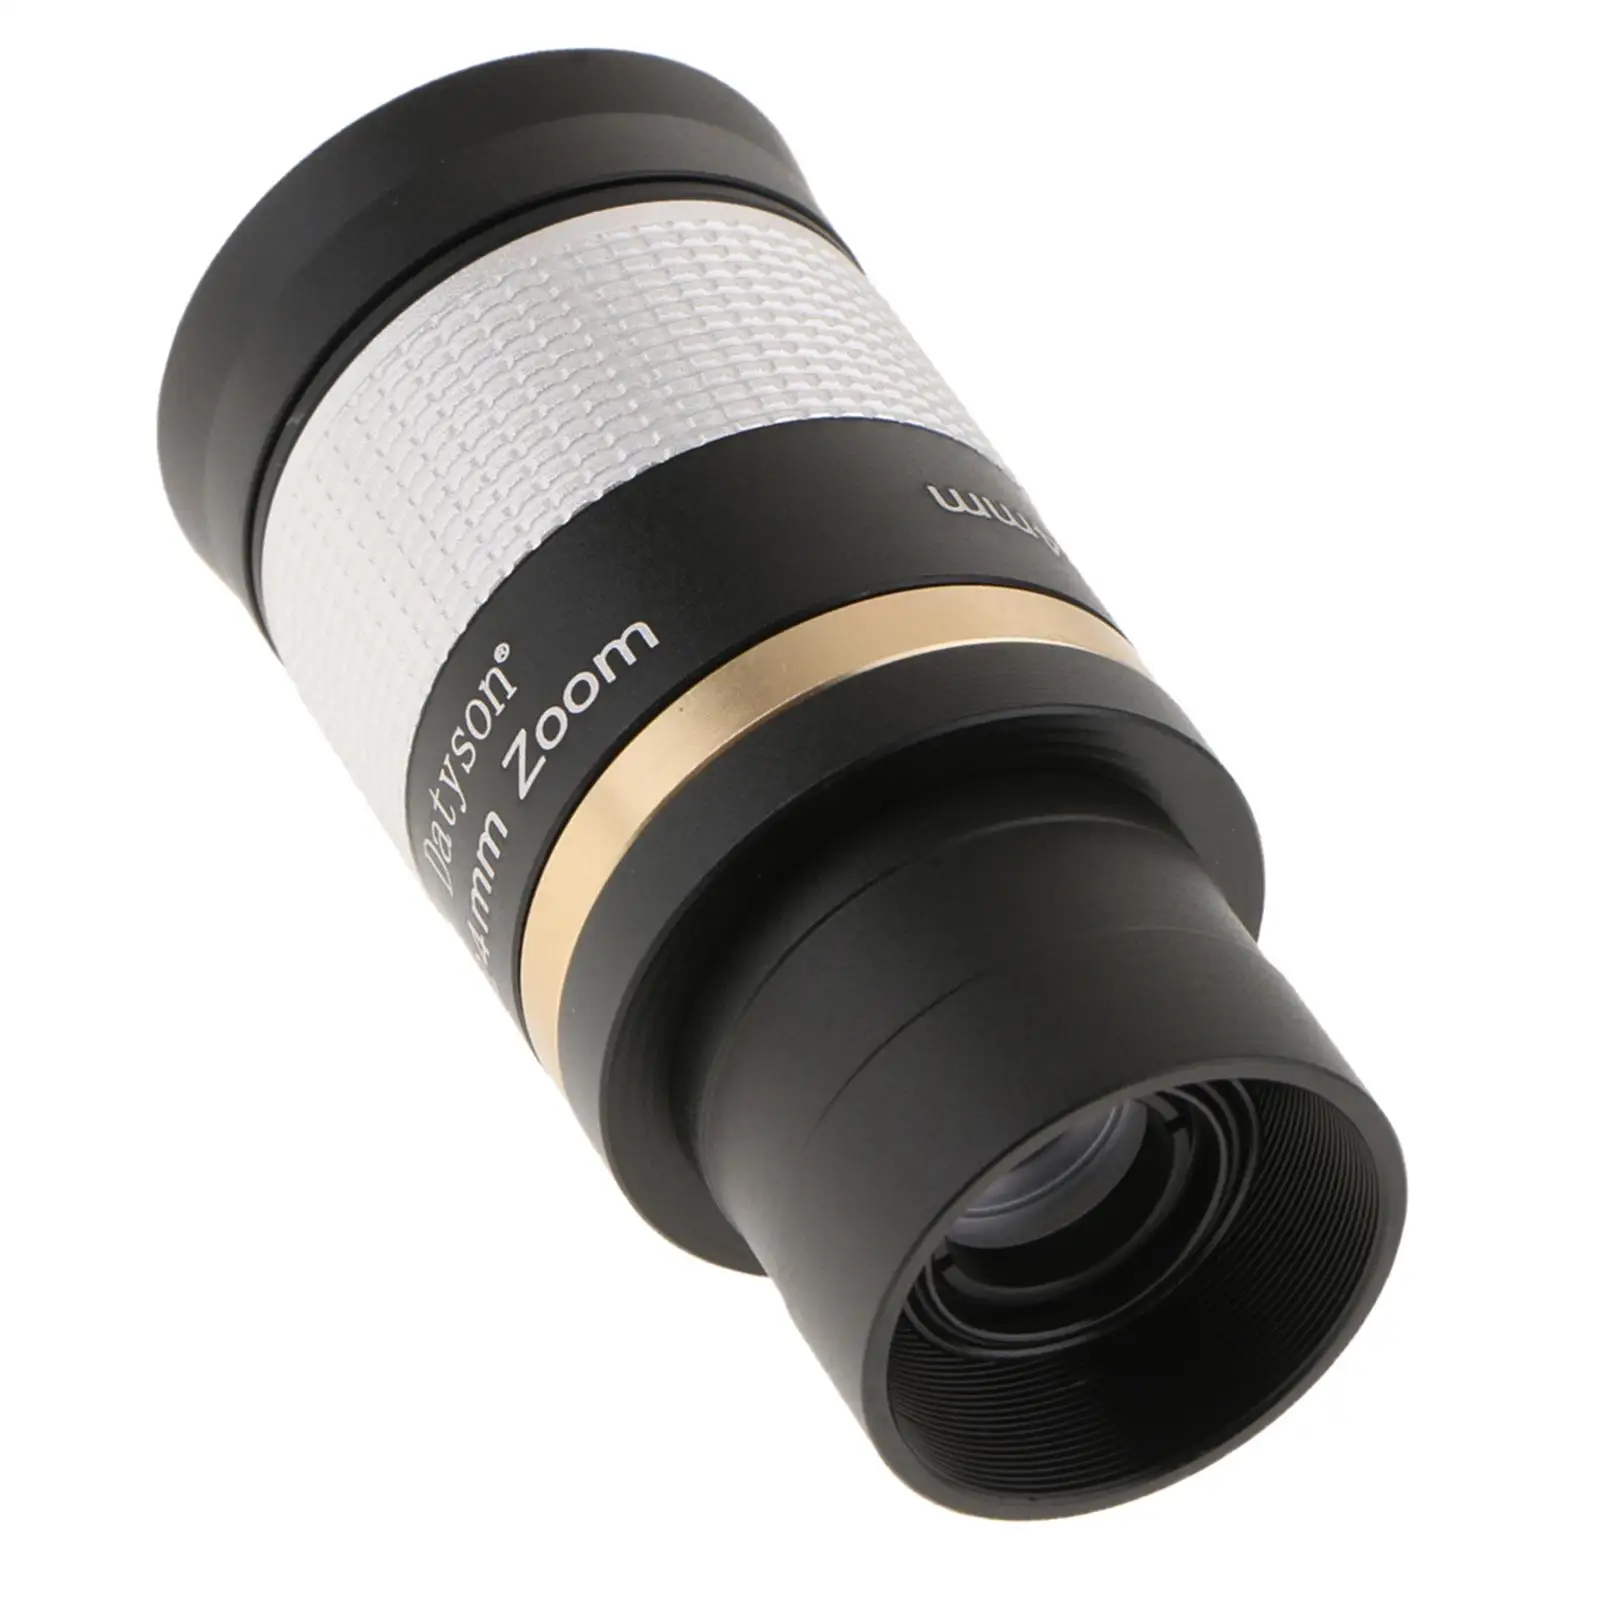 8-24mm ``  Eyepiece for Telescope  Astronomy - Field of View